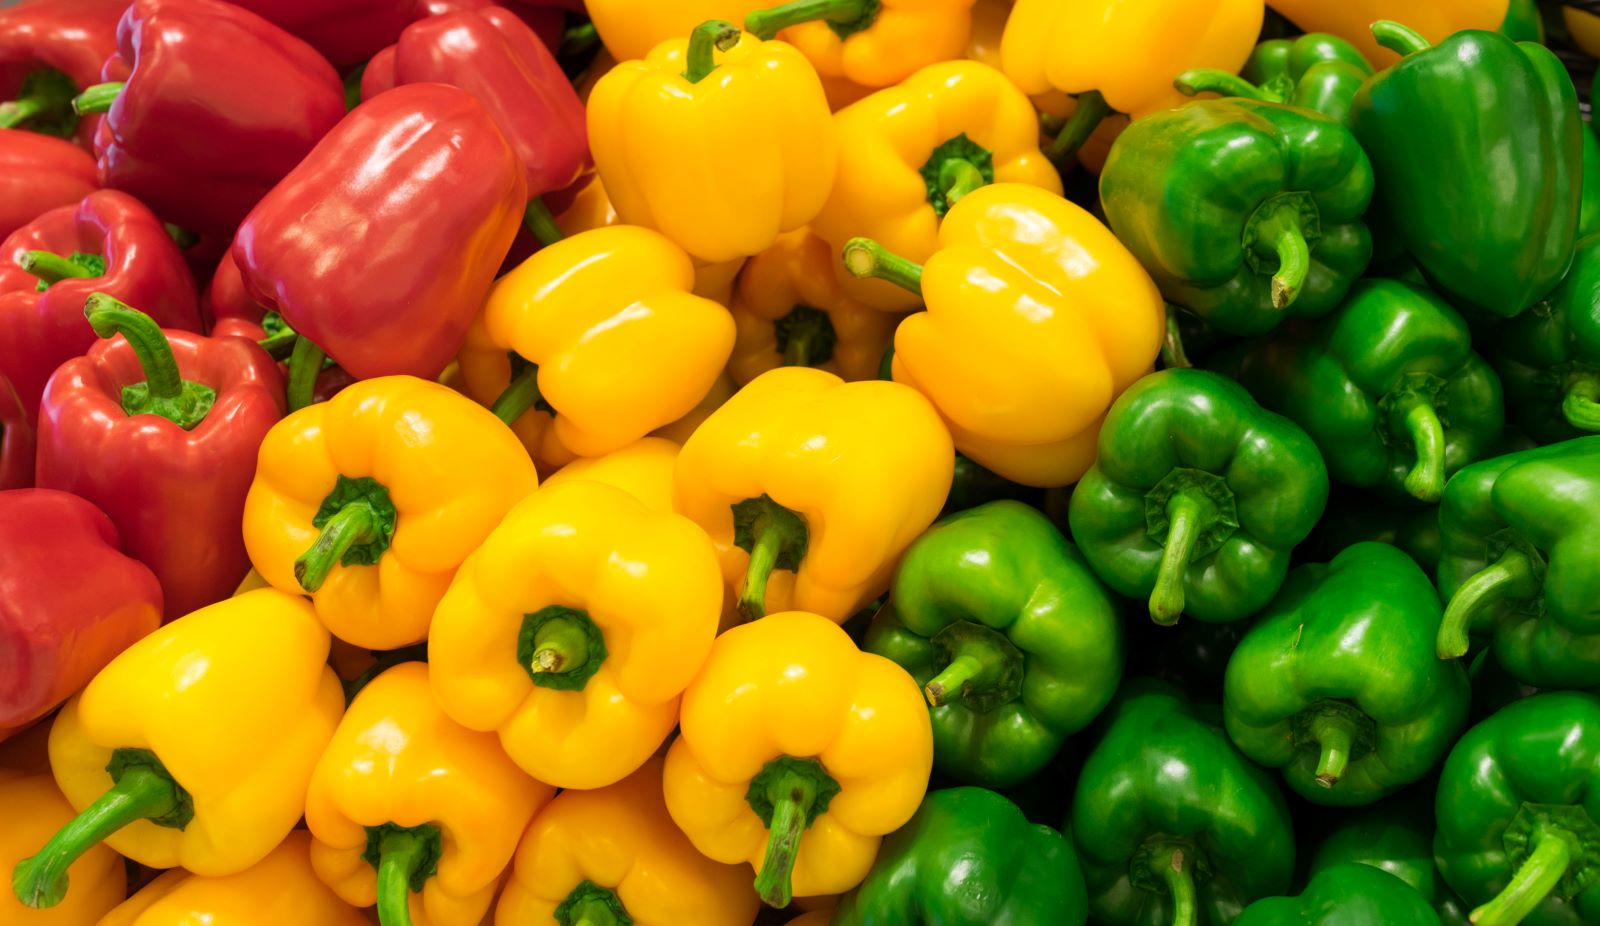 Red, green, yellow and orange bell peppers all have similar macronutrient content. But is one color superior?